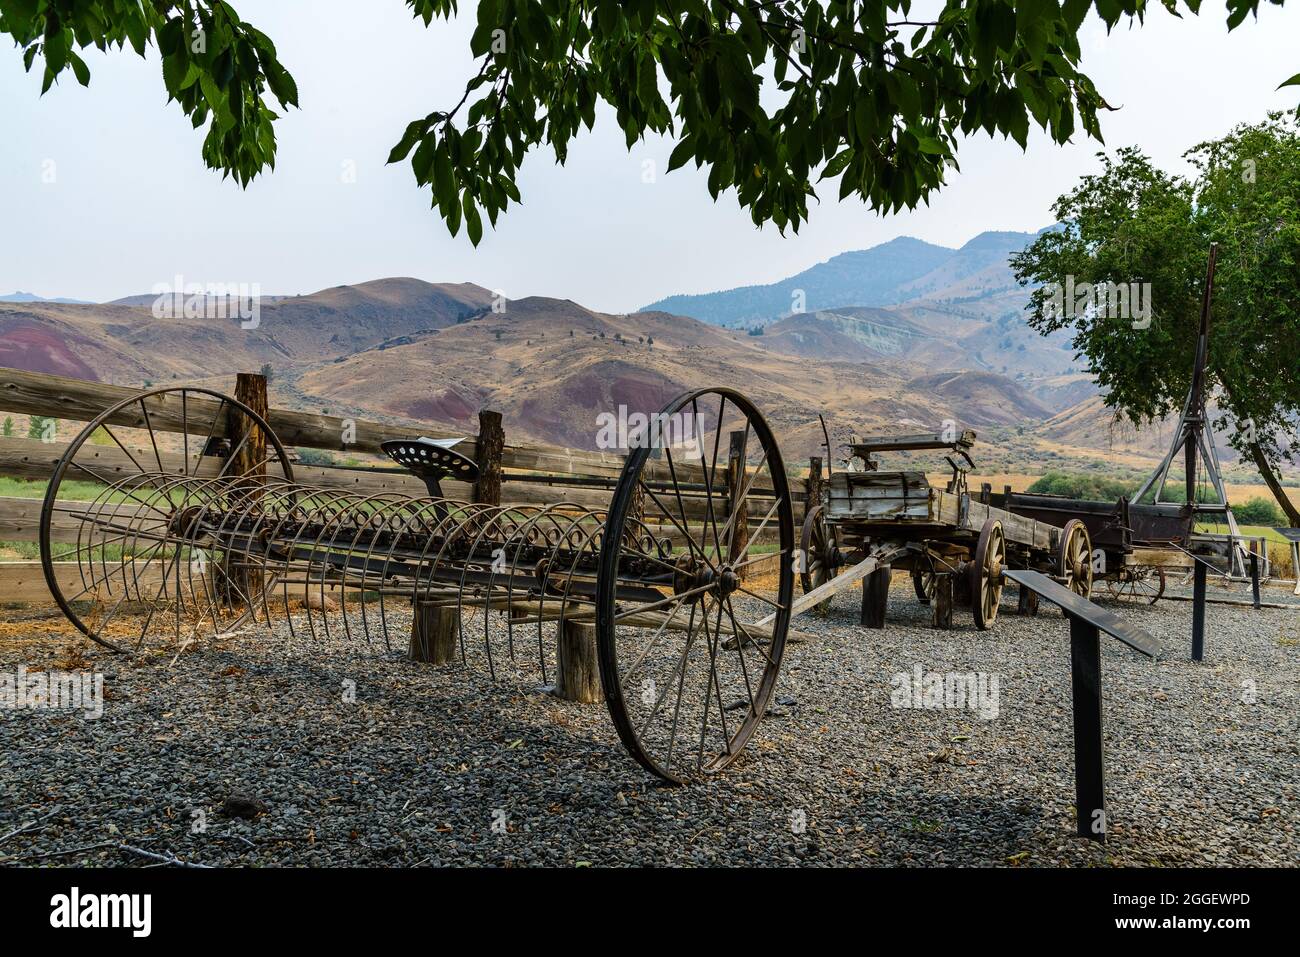 Farm equipments at the historic Jame Cant Ranch , John Day Fossil Beds National Monument. Kimberly, Oregon, USA. Stock Photo